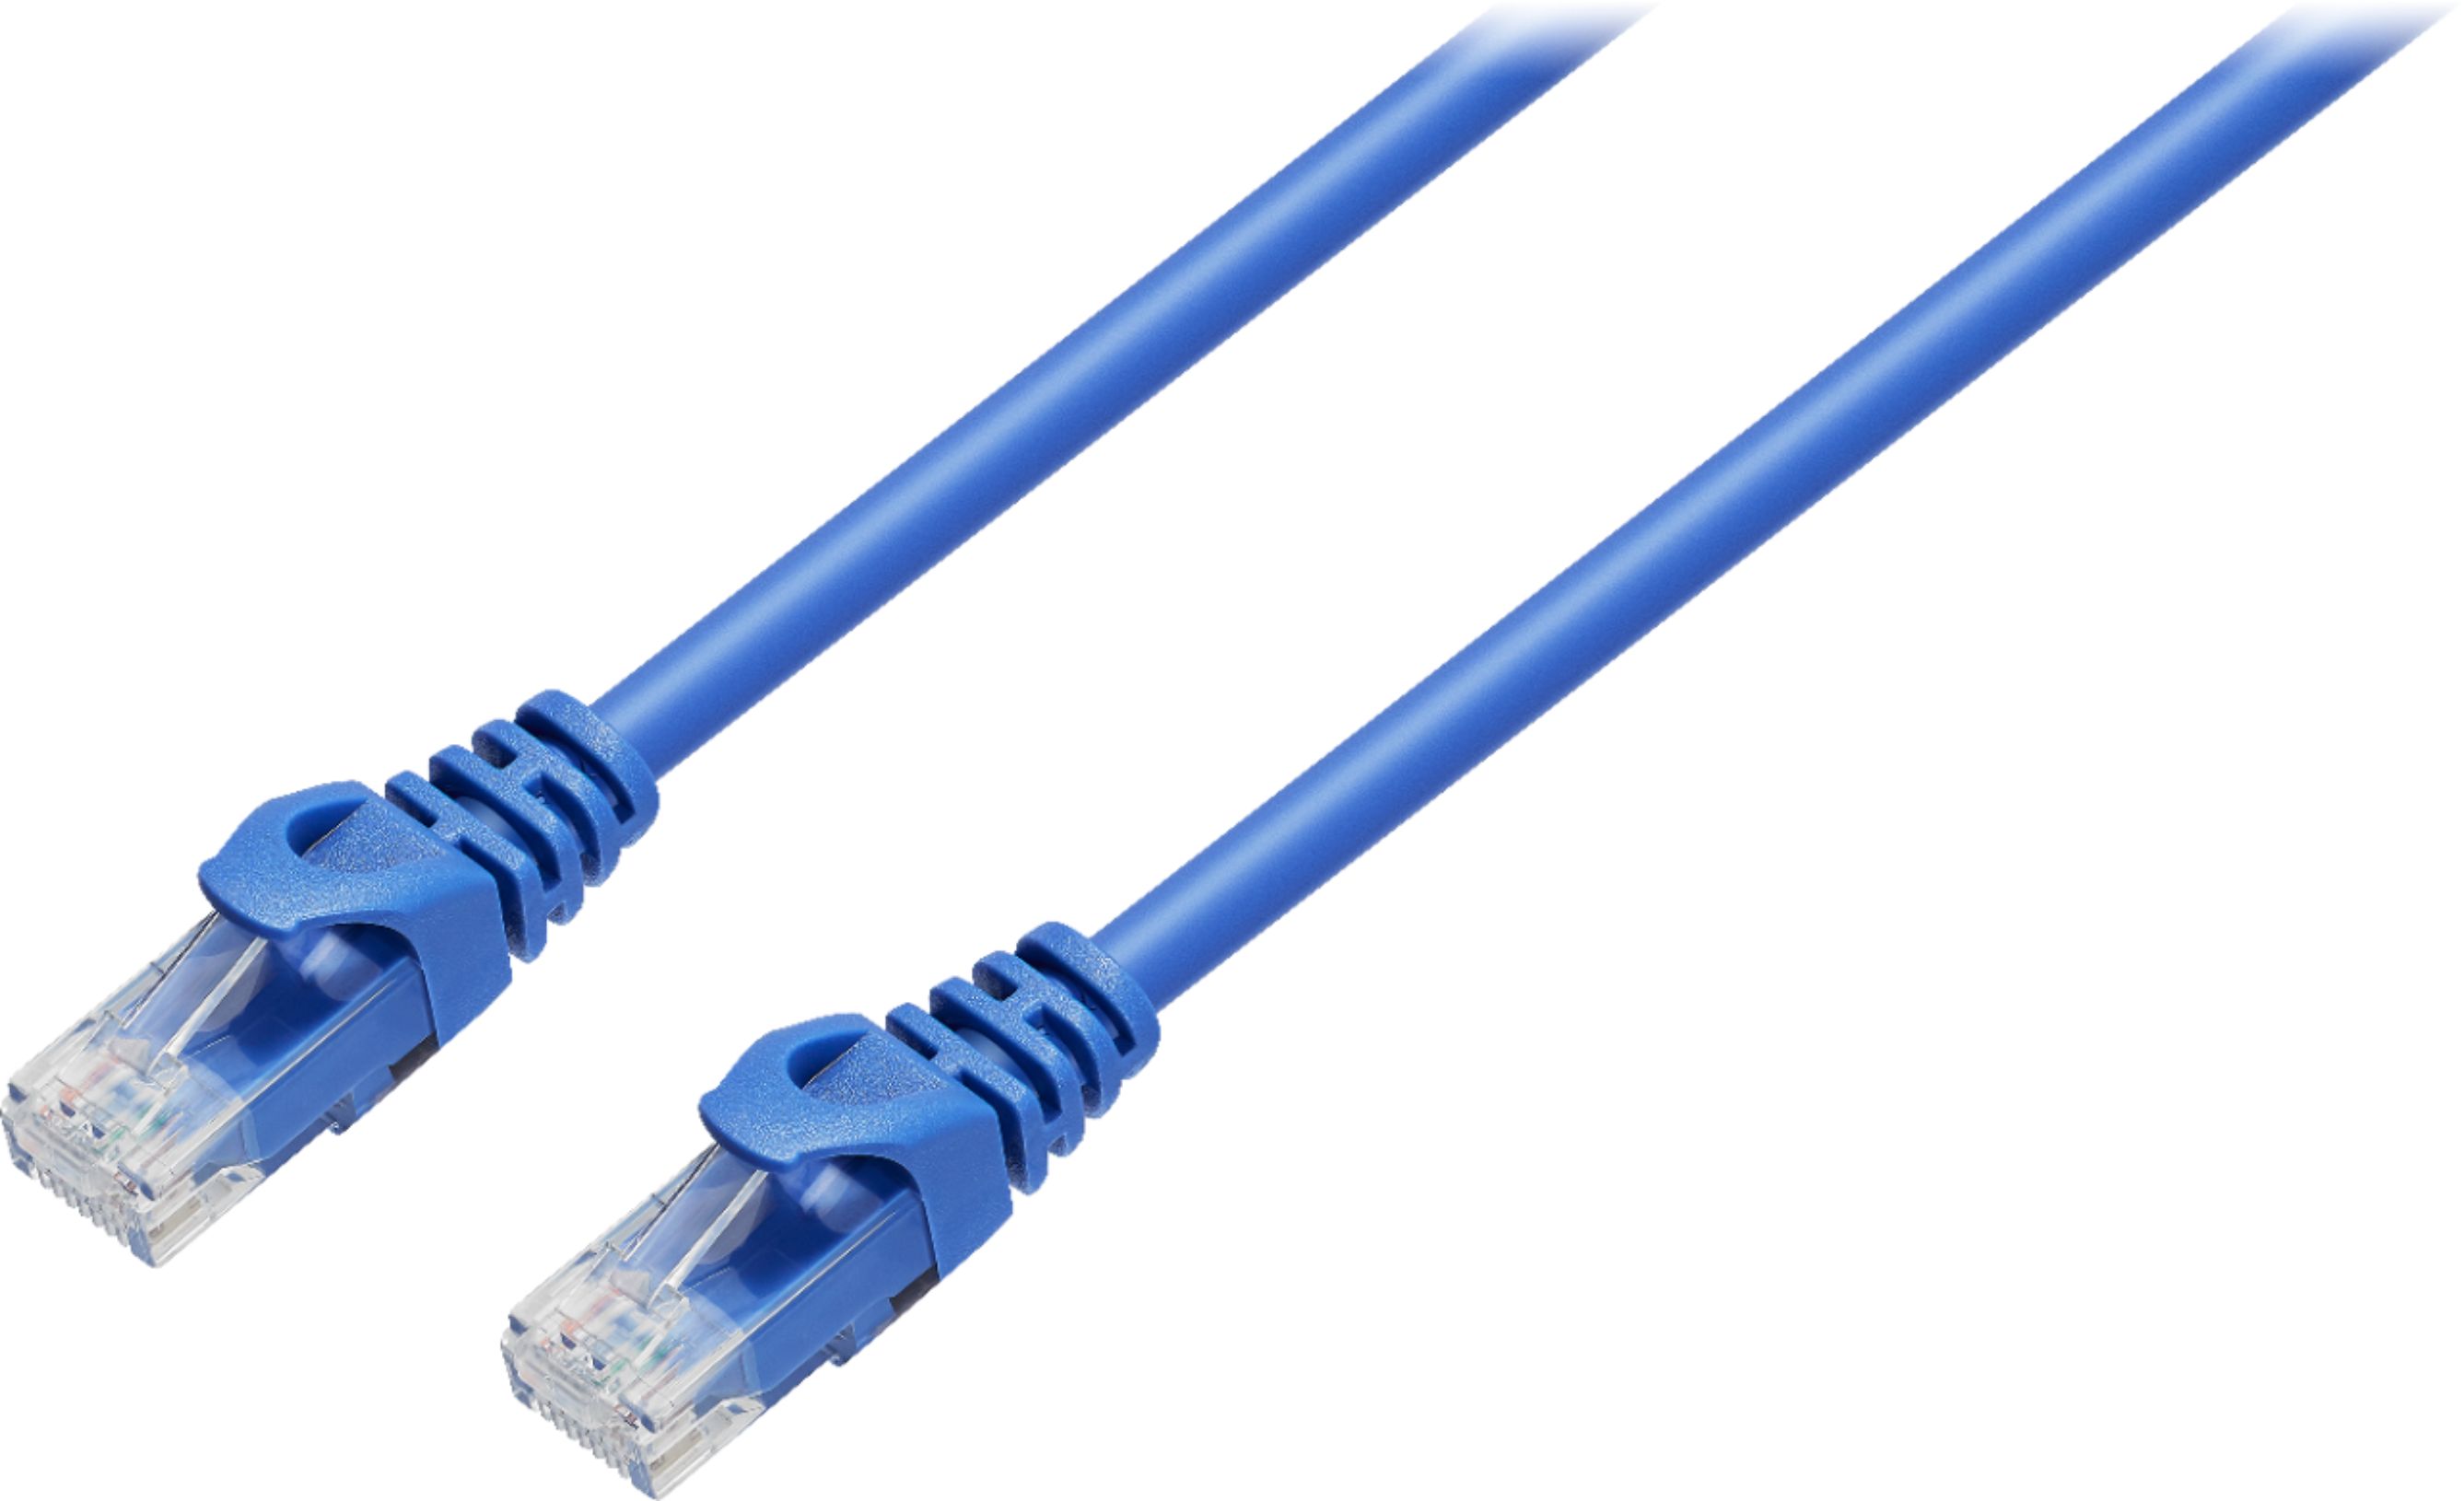 30M 100Ft Cat6 Cat 6 Network Cable RJ45 Ethernet Lan High Speed Wire Cable